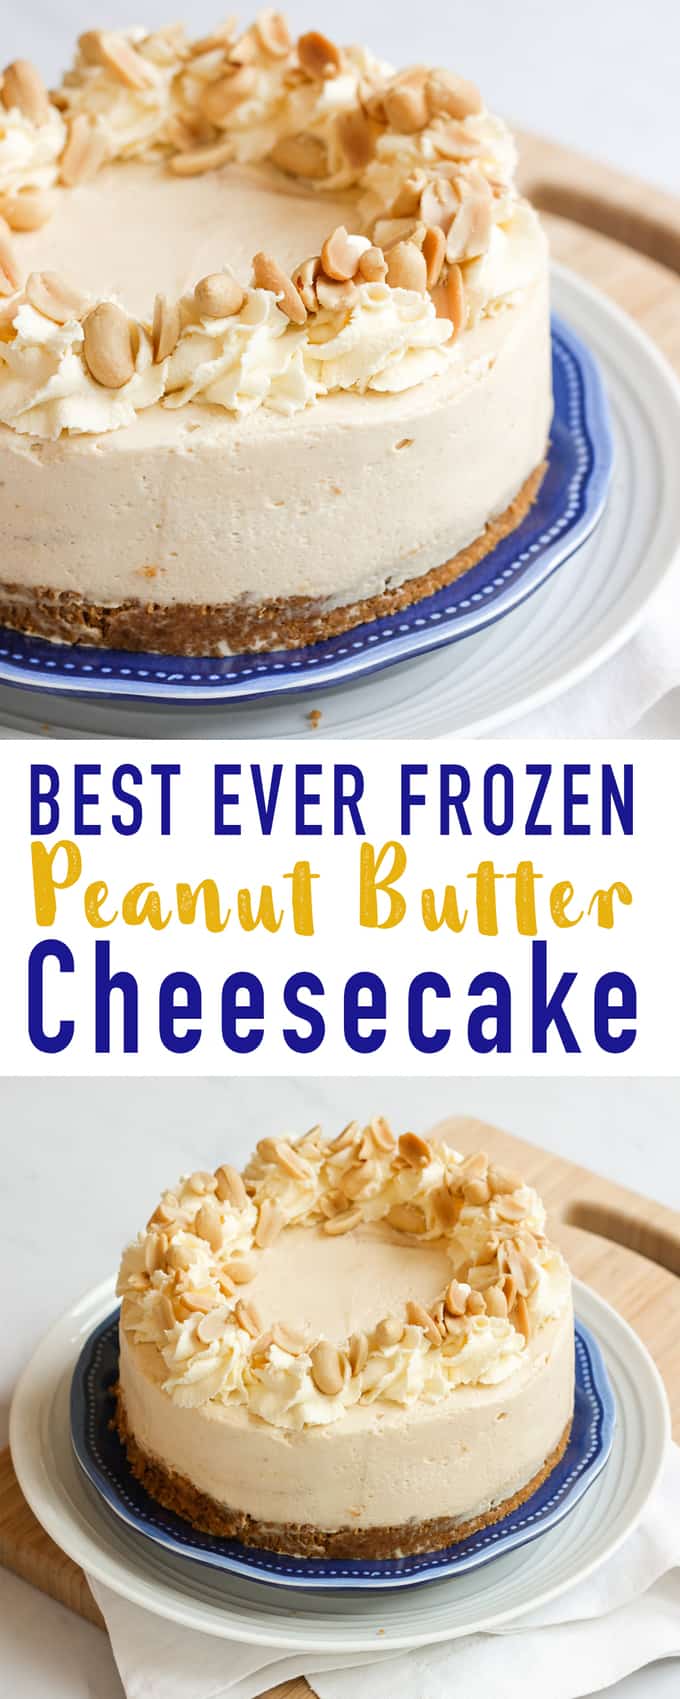 Frozen Peanut Butter Cheese Cake Recipe - Delicious dessert made with cream cheese and peanut butter on a buttery biscuit base. The perfect pudding to finish any dinner!